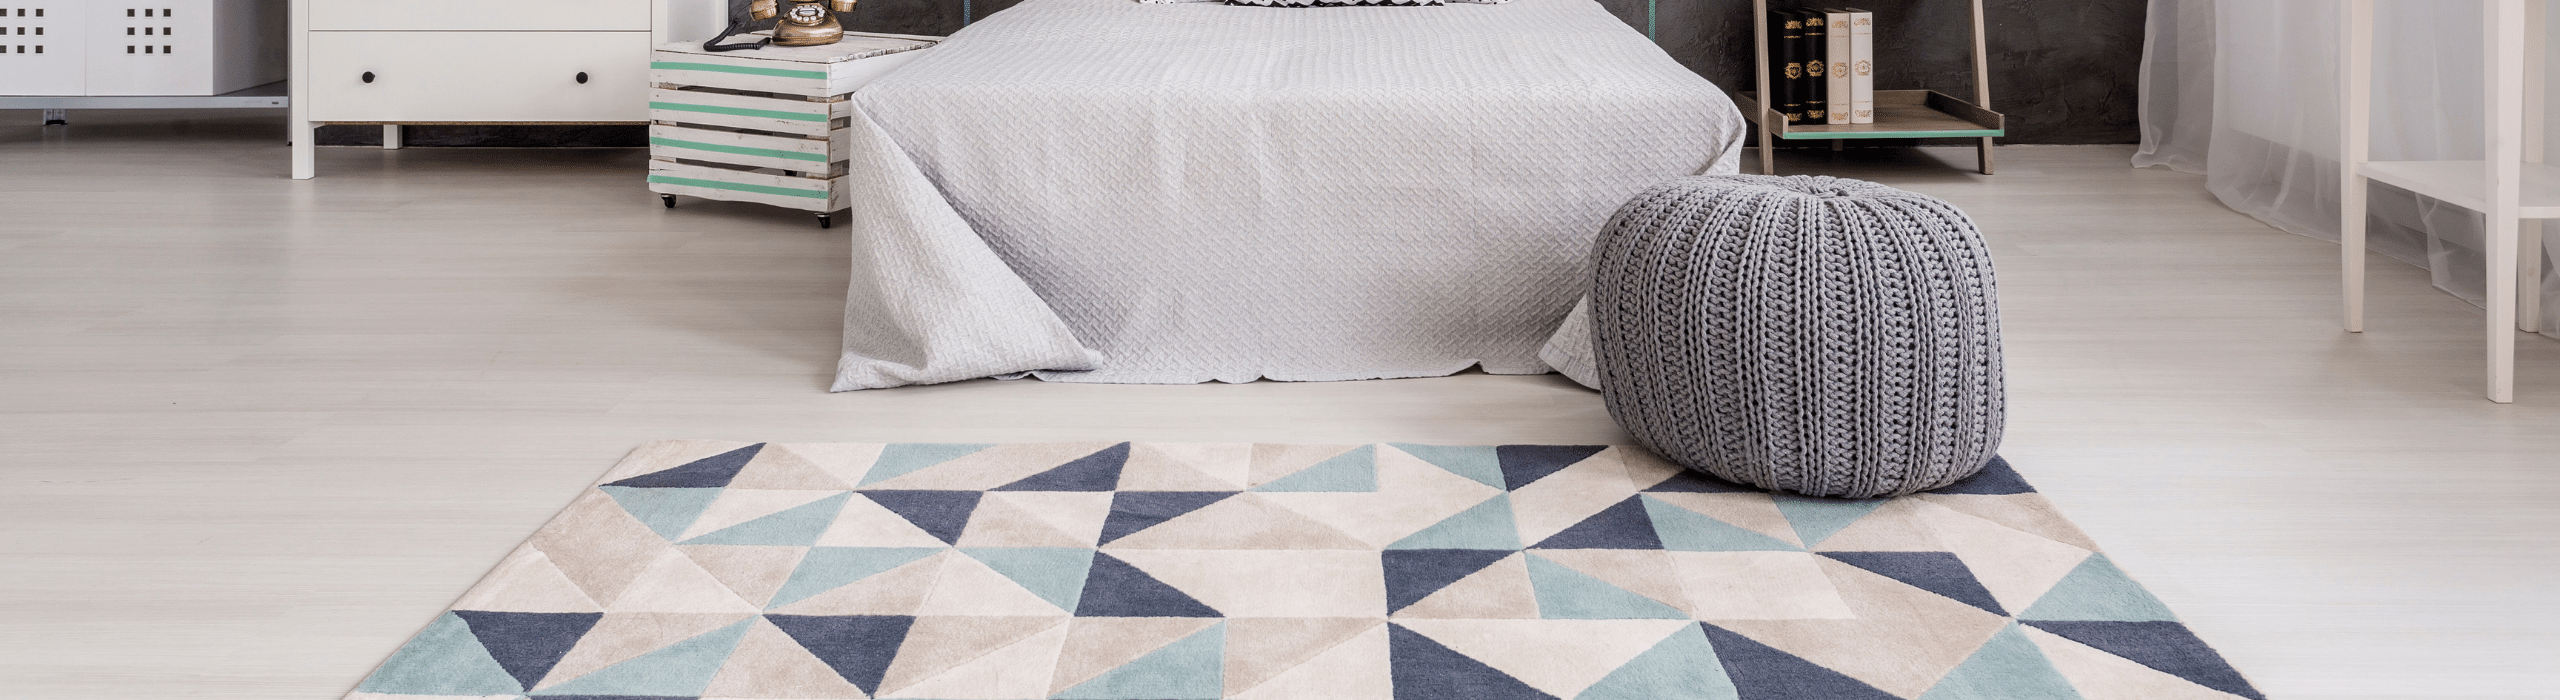 Contemporary abstract rug with geometric design at foot of bed